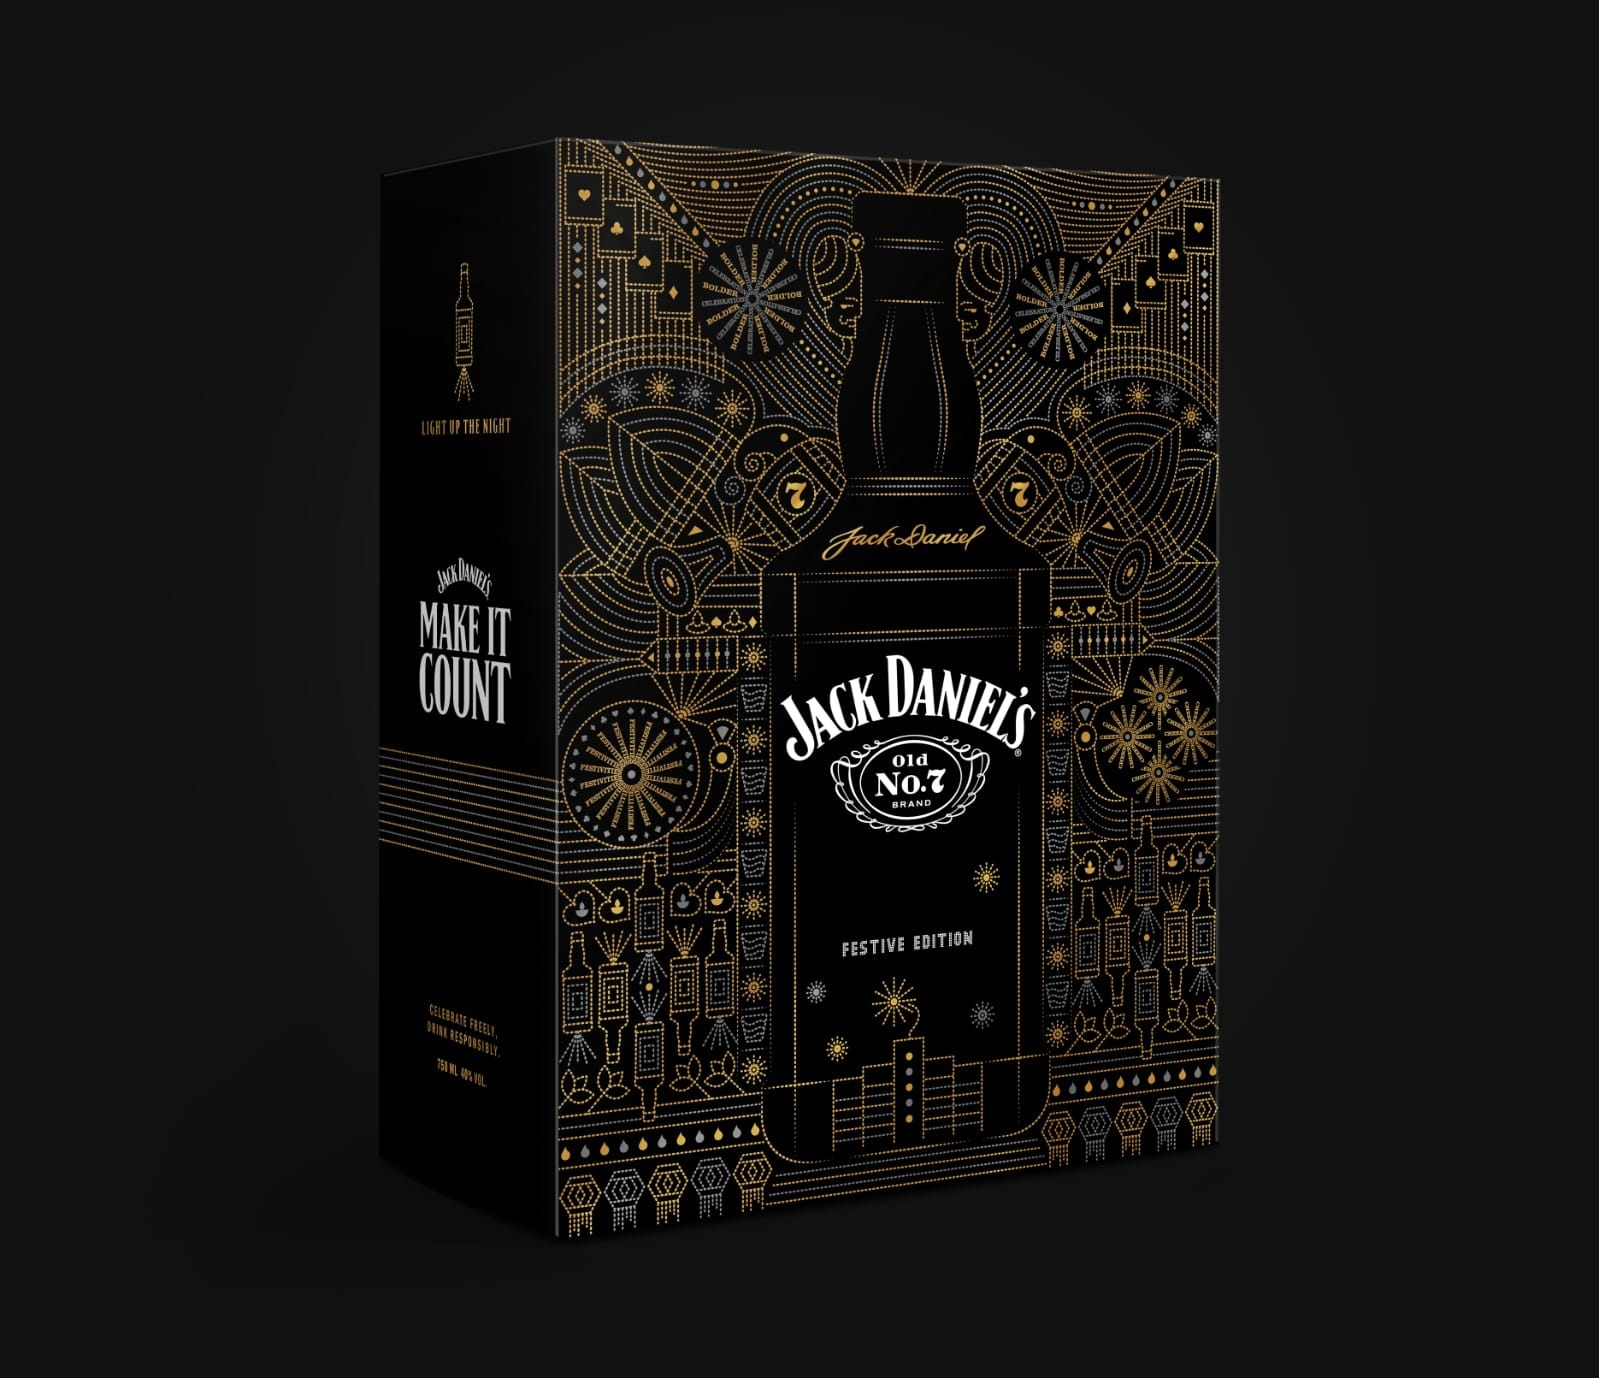 This festive season, Make It Count with Jack Daniel's